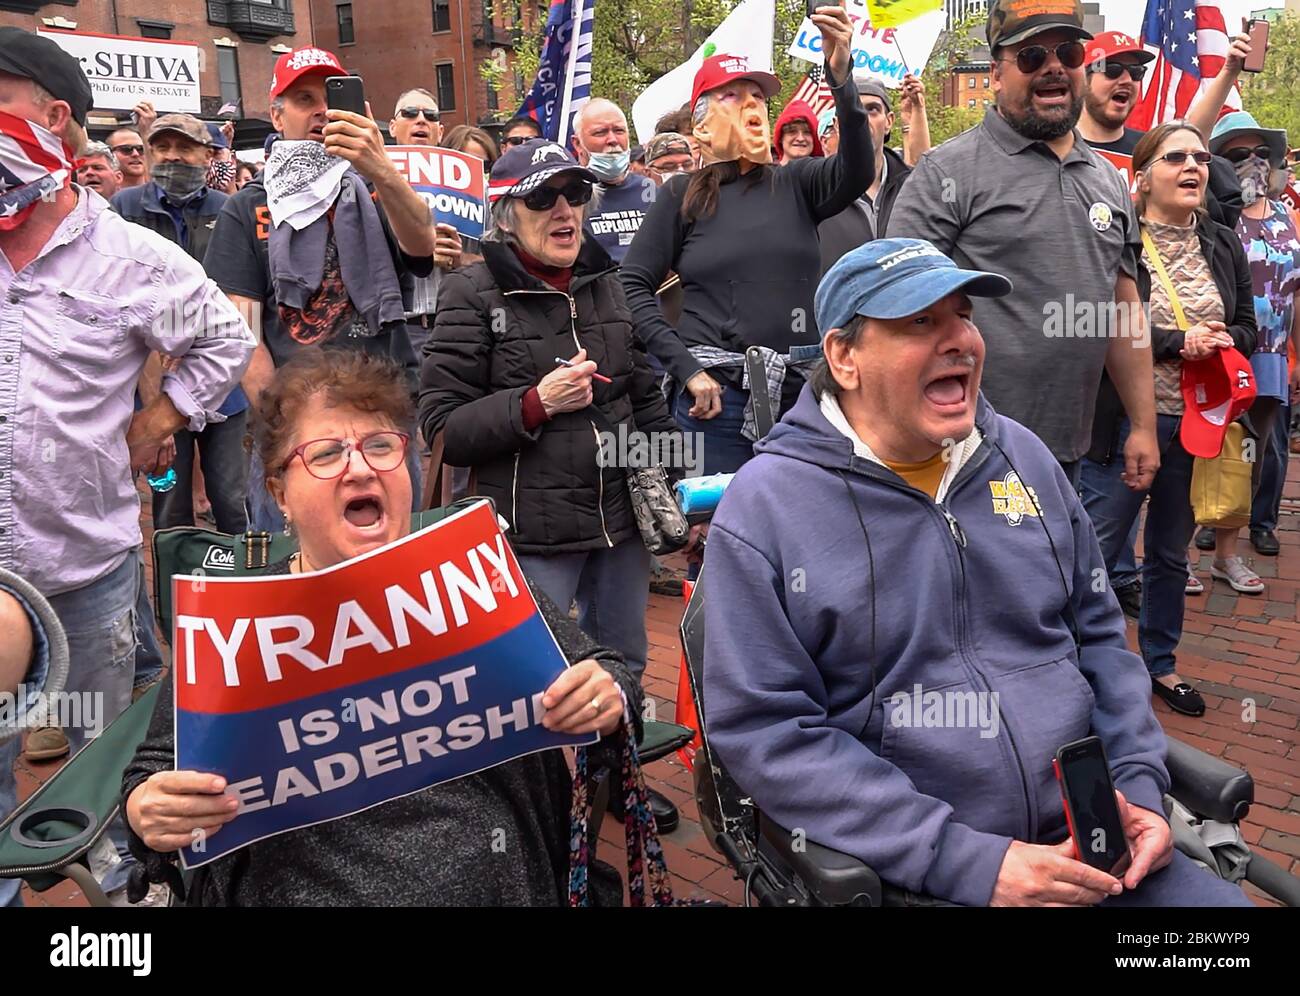 May 4, 2020, Boston, Massachusetts USA: Anti lock down protesters on wheel chairs shouting in support to end lock down during Liberty rally at Massachusetts State House in Boston. Large crowd of anti lock down protesters gather outside of the State House to protest Massachusetts Governor Charlie Baker's stay-at-home emergency order at Liberty rally in Boston. Stock Photo